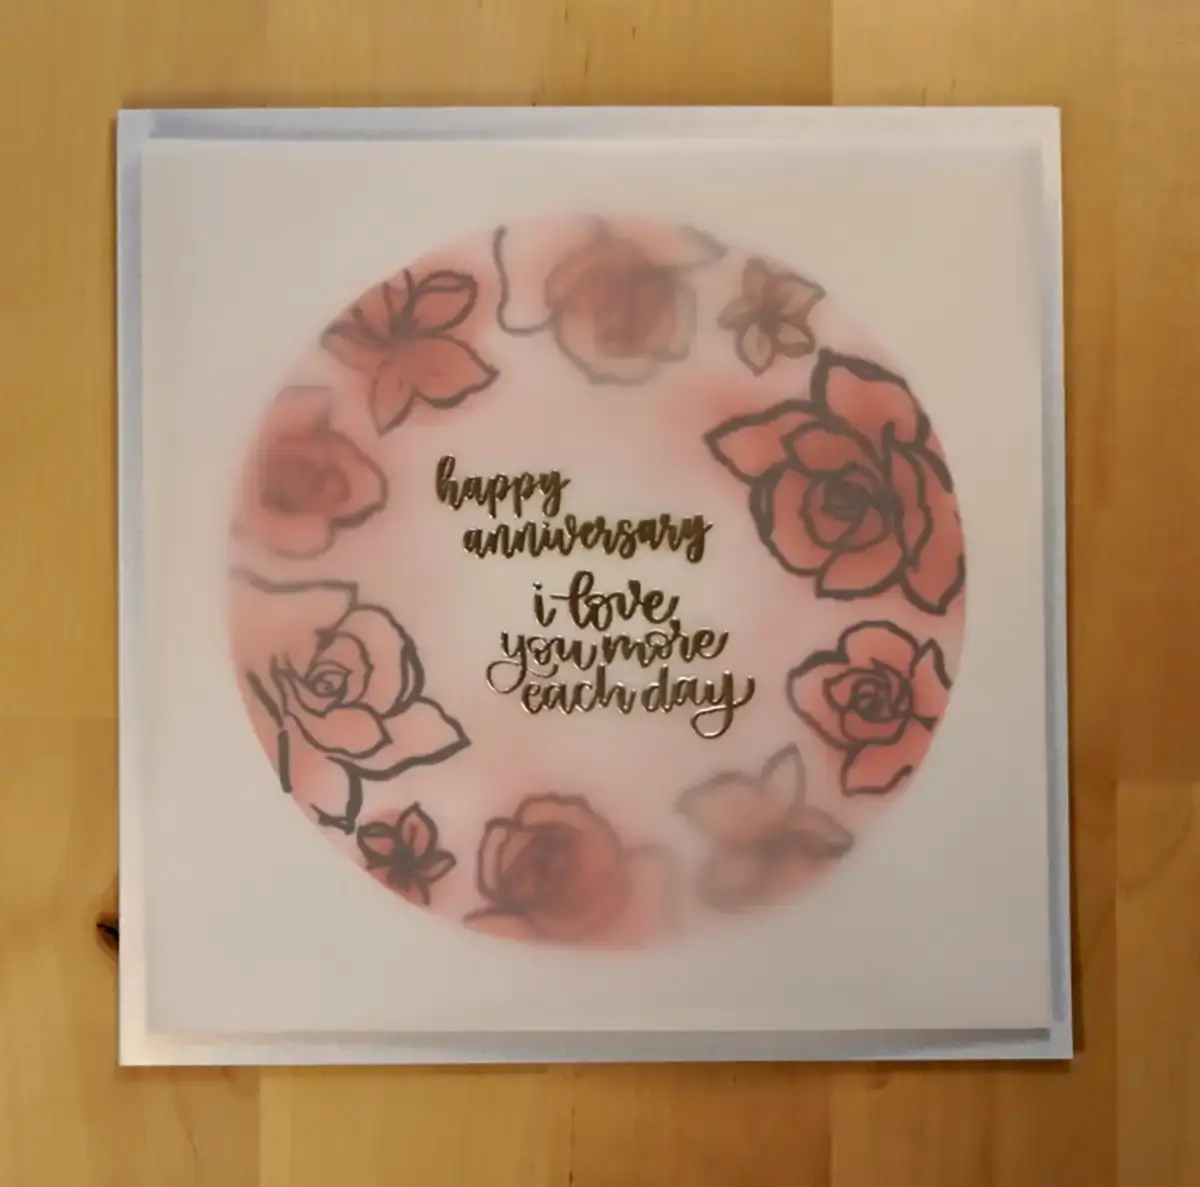 A unique anniversary card with roses on it.